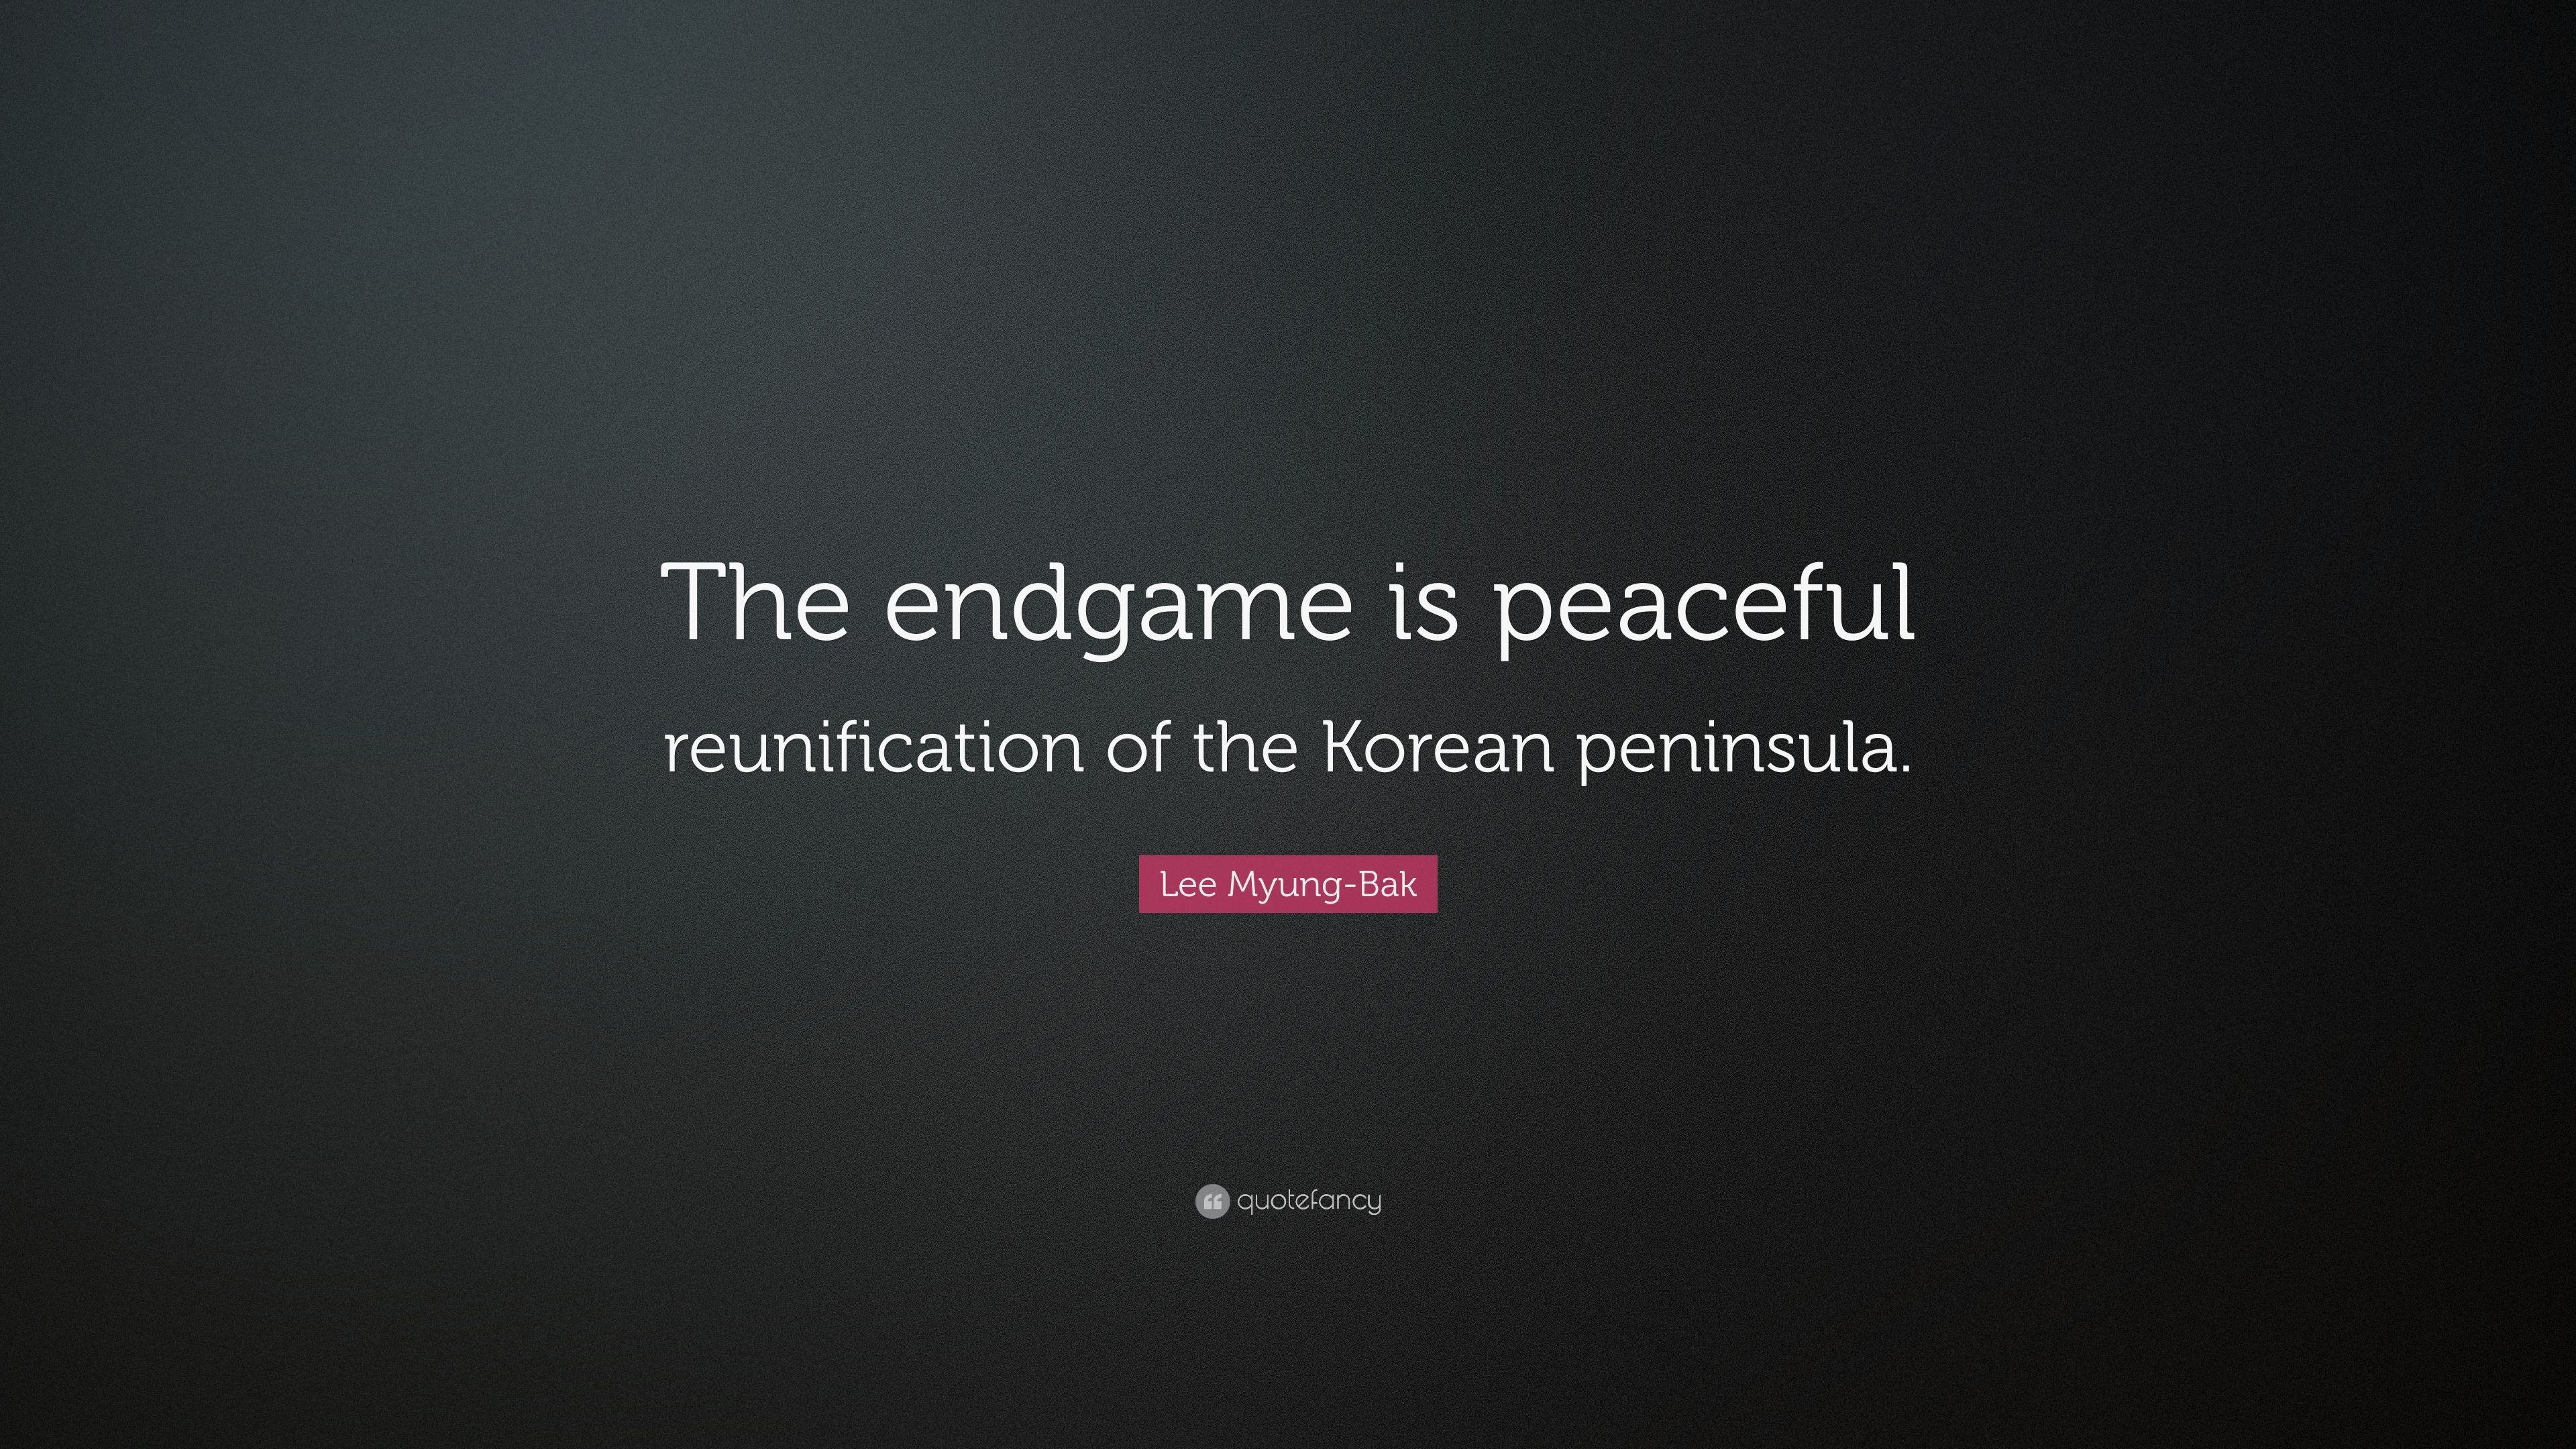 Lee Myung Bak Quote: “The Endgame Is Peaceful Reunification Of The Korean Peninsula.” (7 Wallpaper)